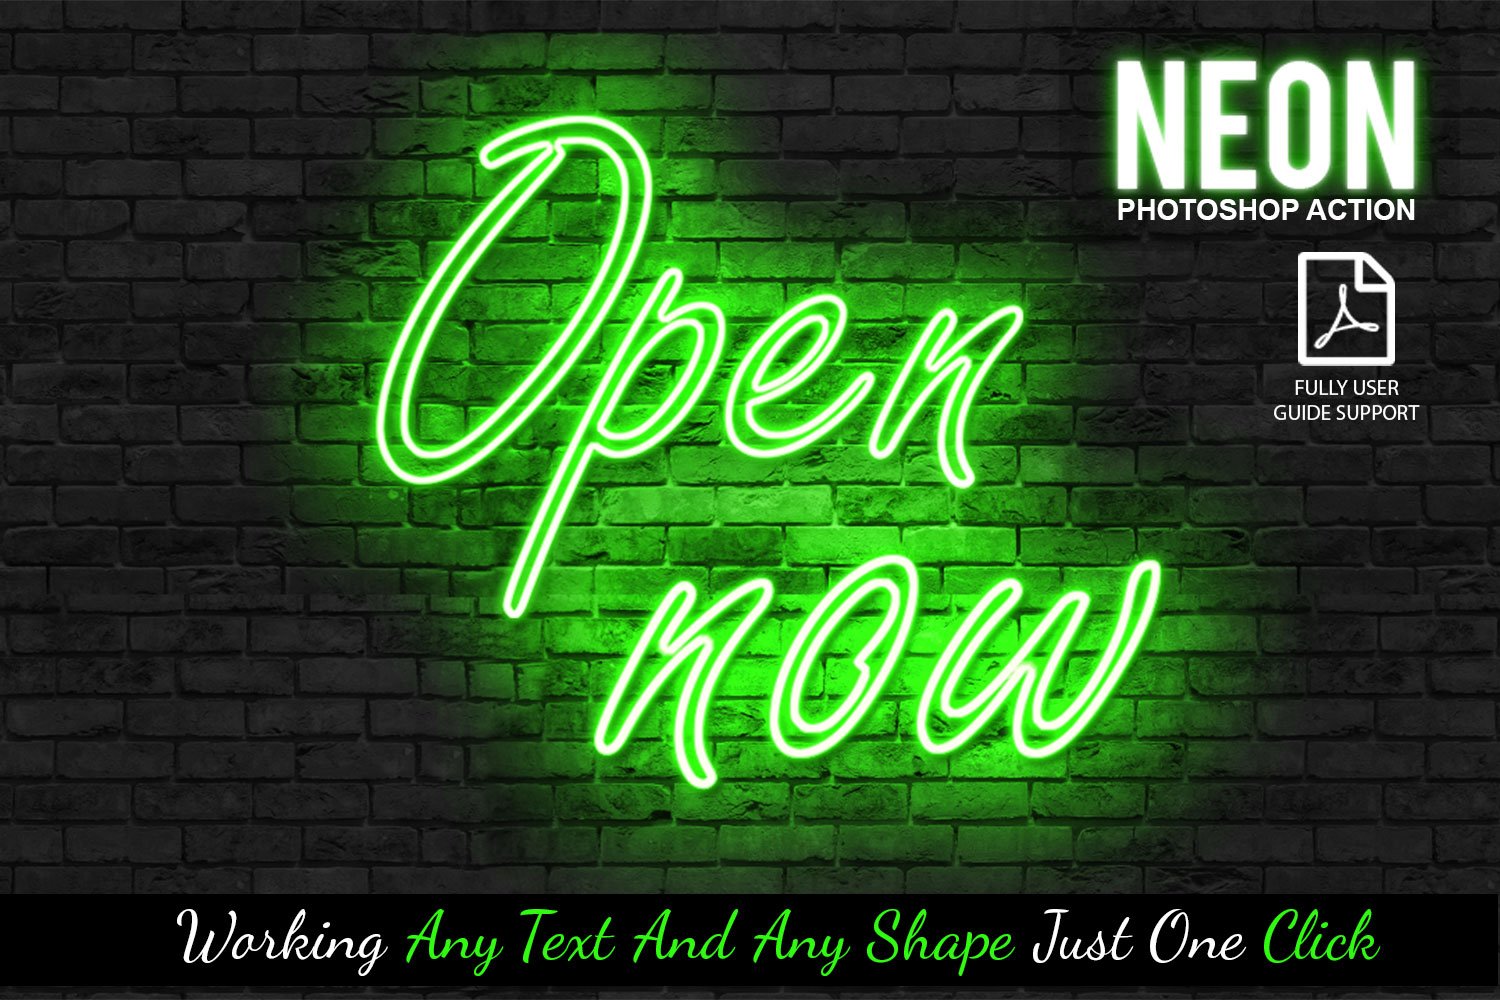 Neon Photoshop Actioncover image.